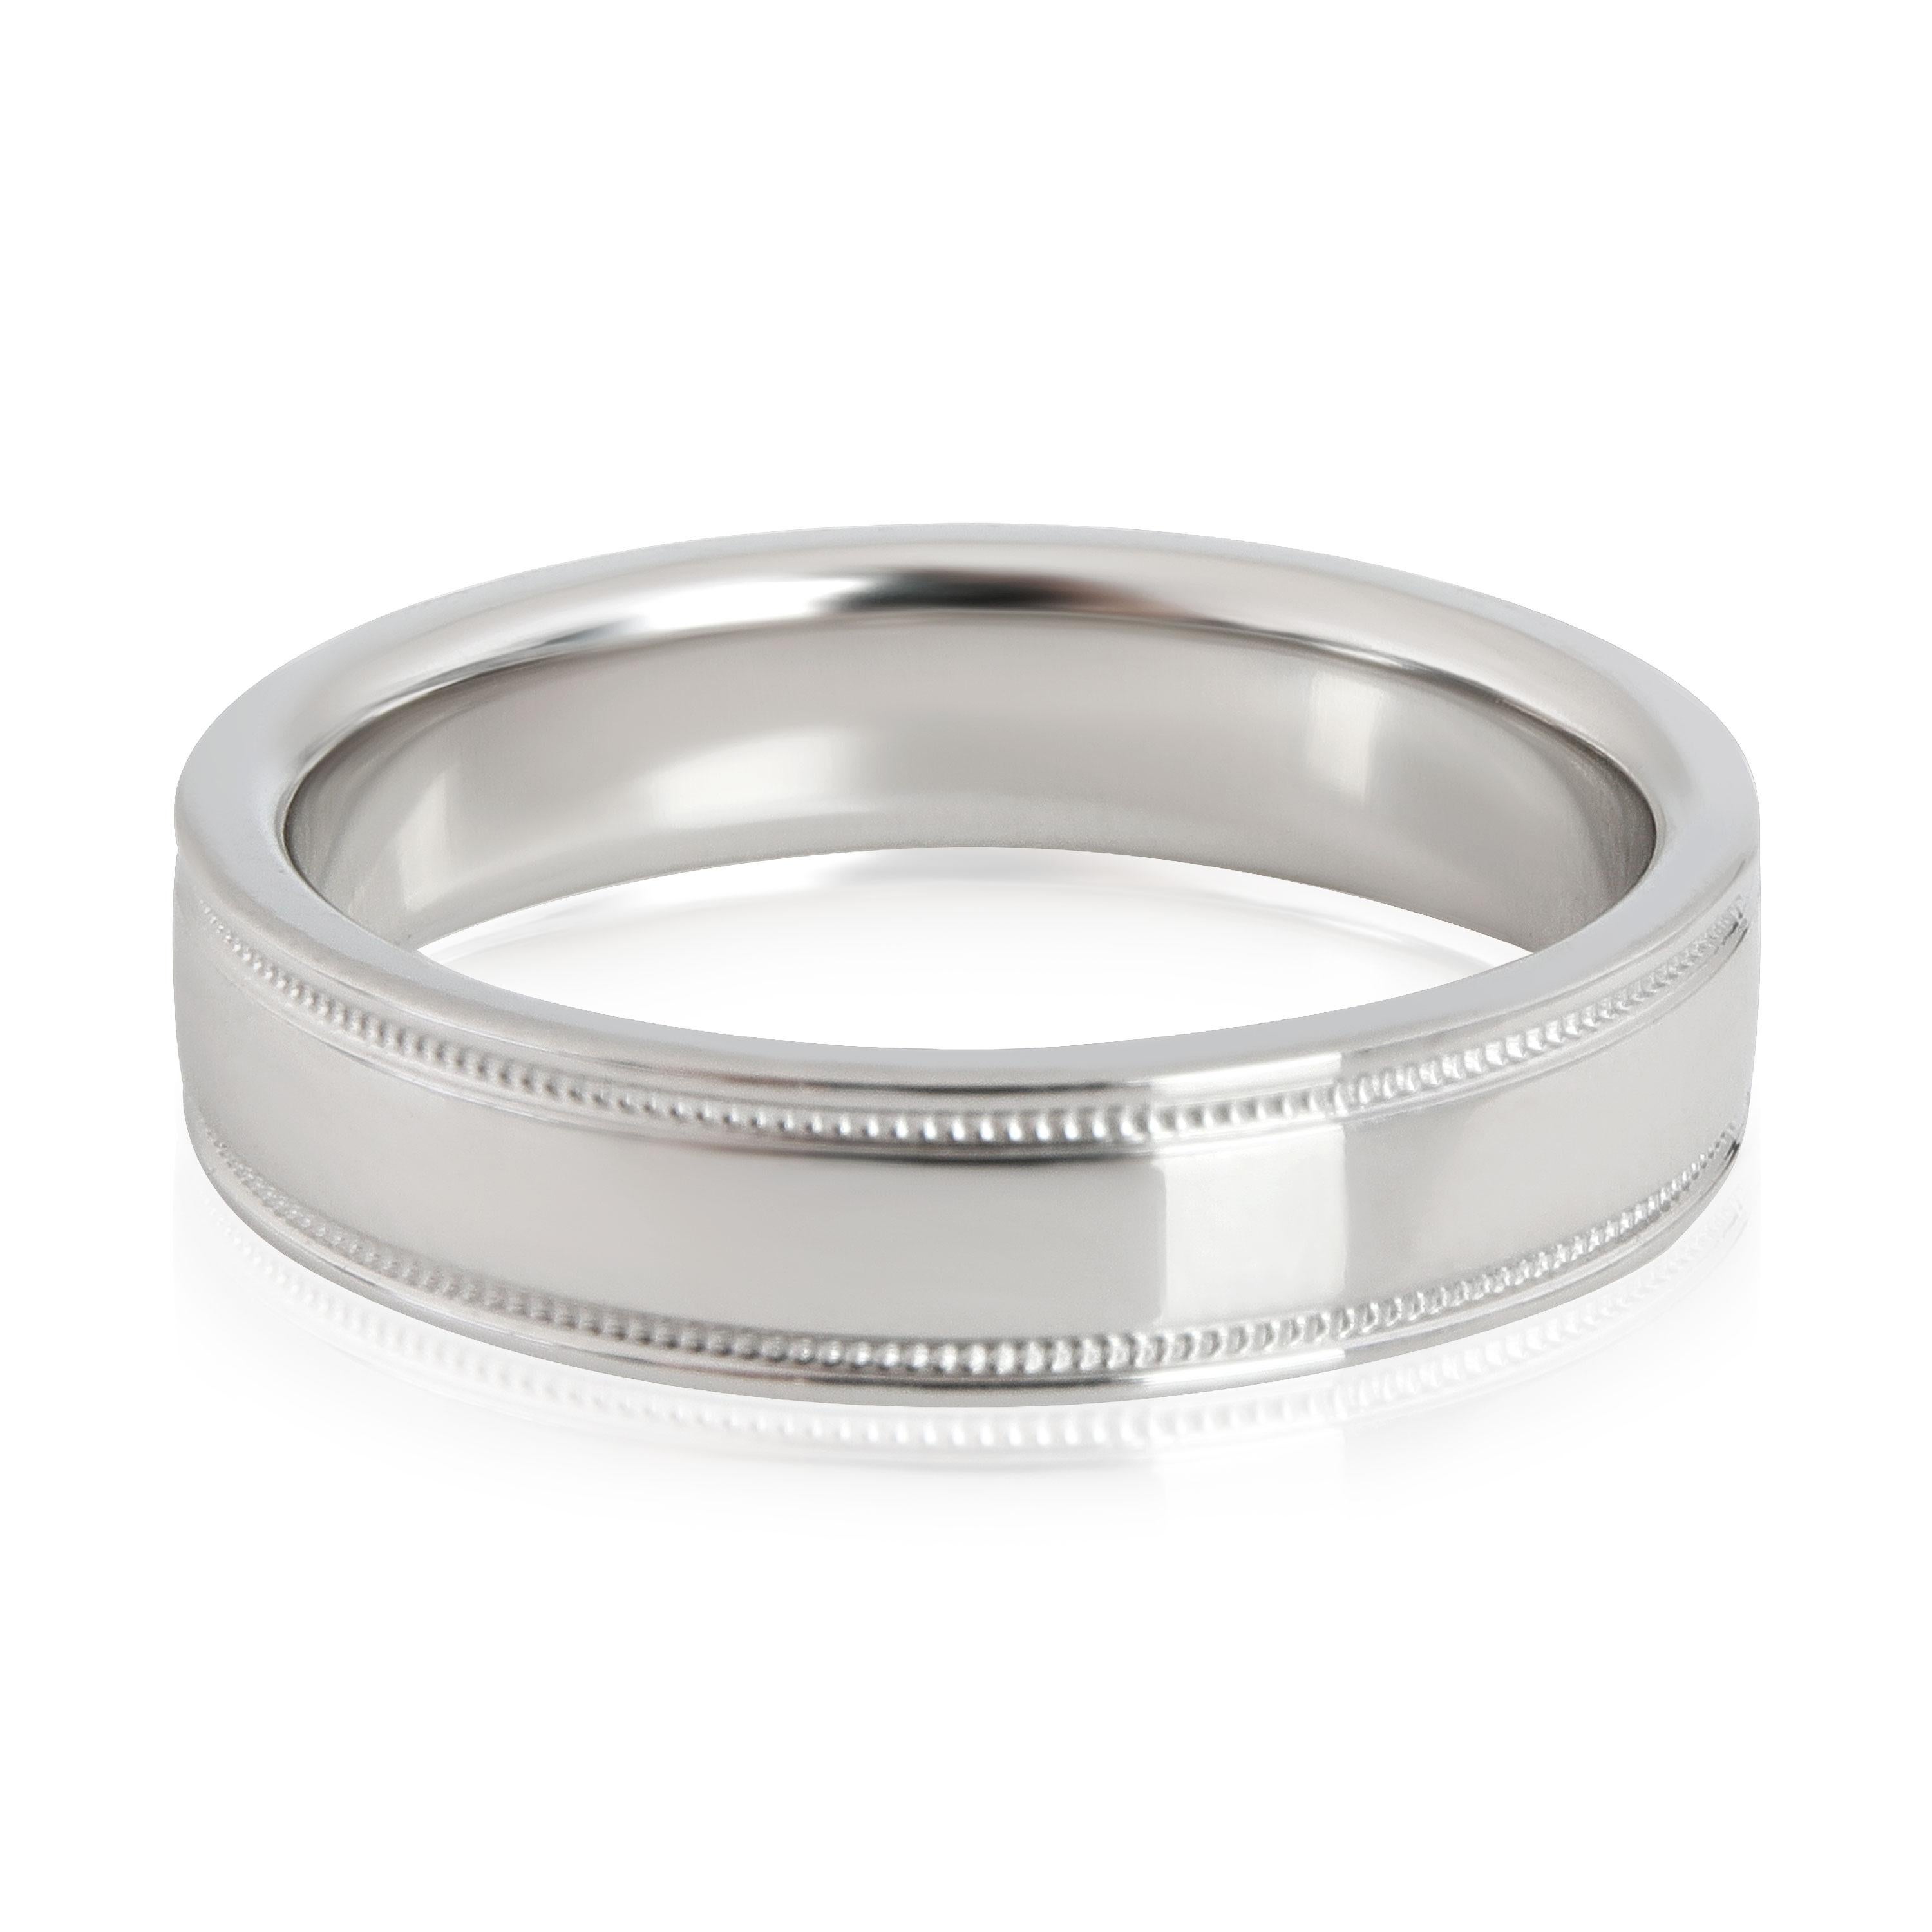 Tiffany & Co. Double Miligrain Band in Platinum

PRIMARY DETAILS
SKU: 114037
Listing Title: Tiffany & Co. Double Miligrain Band in Platinum
Condition Description: Retails for 1800 USD. In excellent condition and recently polished. Ring size is